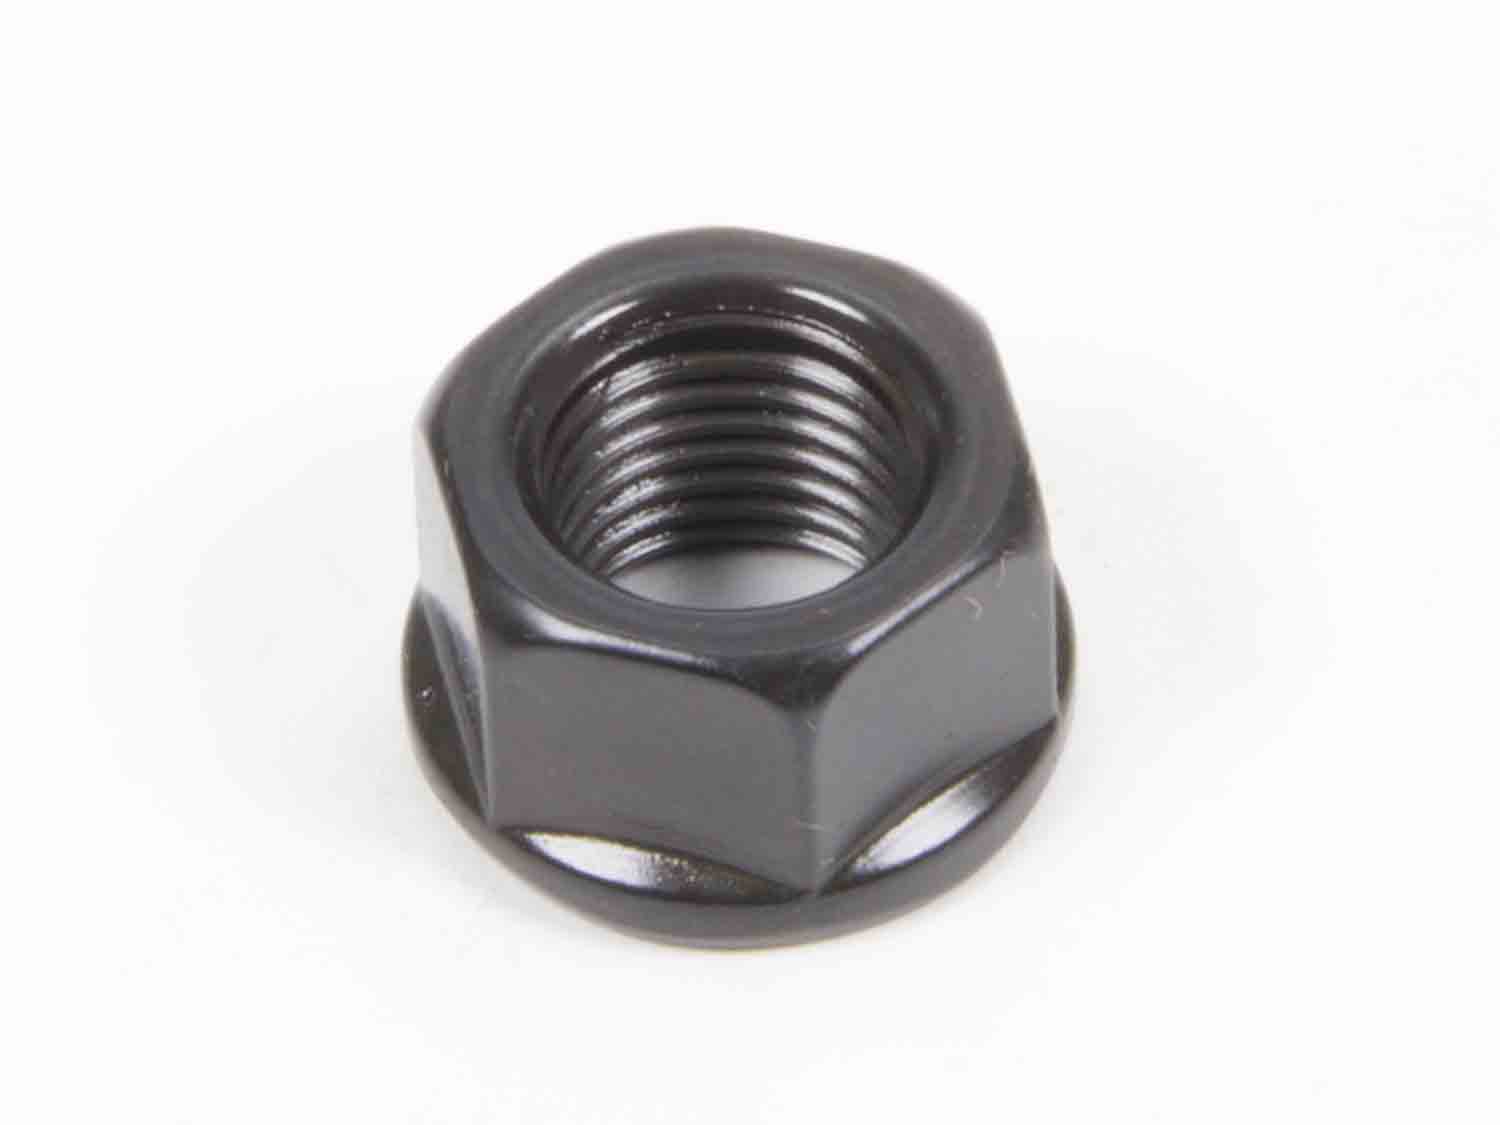 ARP Automotive Racing Products 200-8632 5/16-24 Hex Nuts 